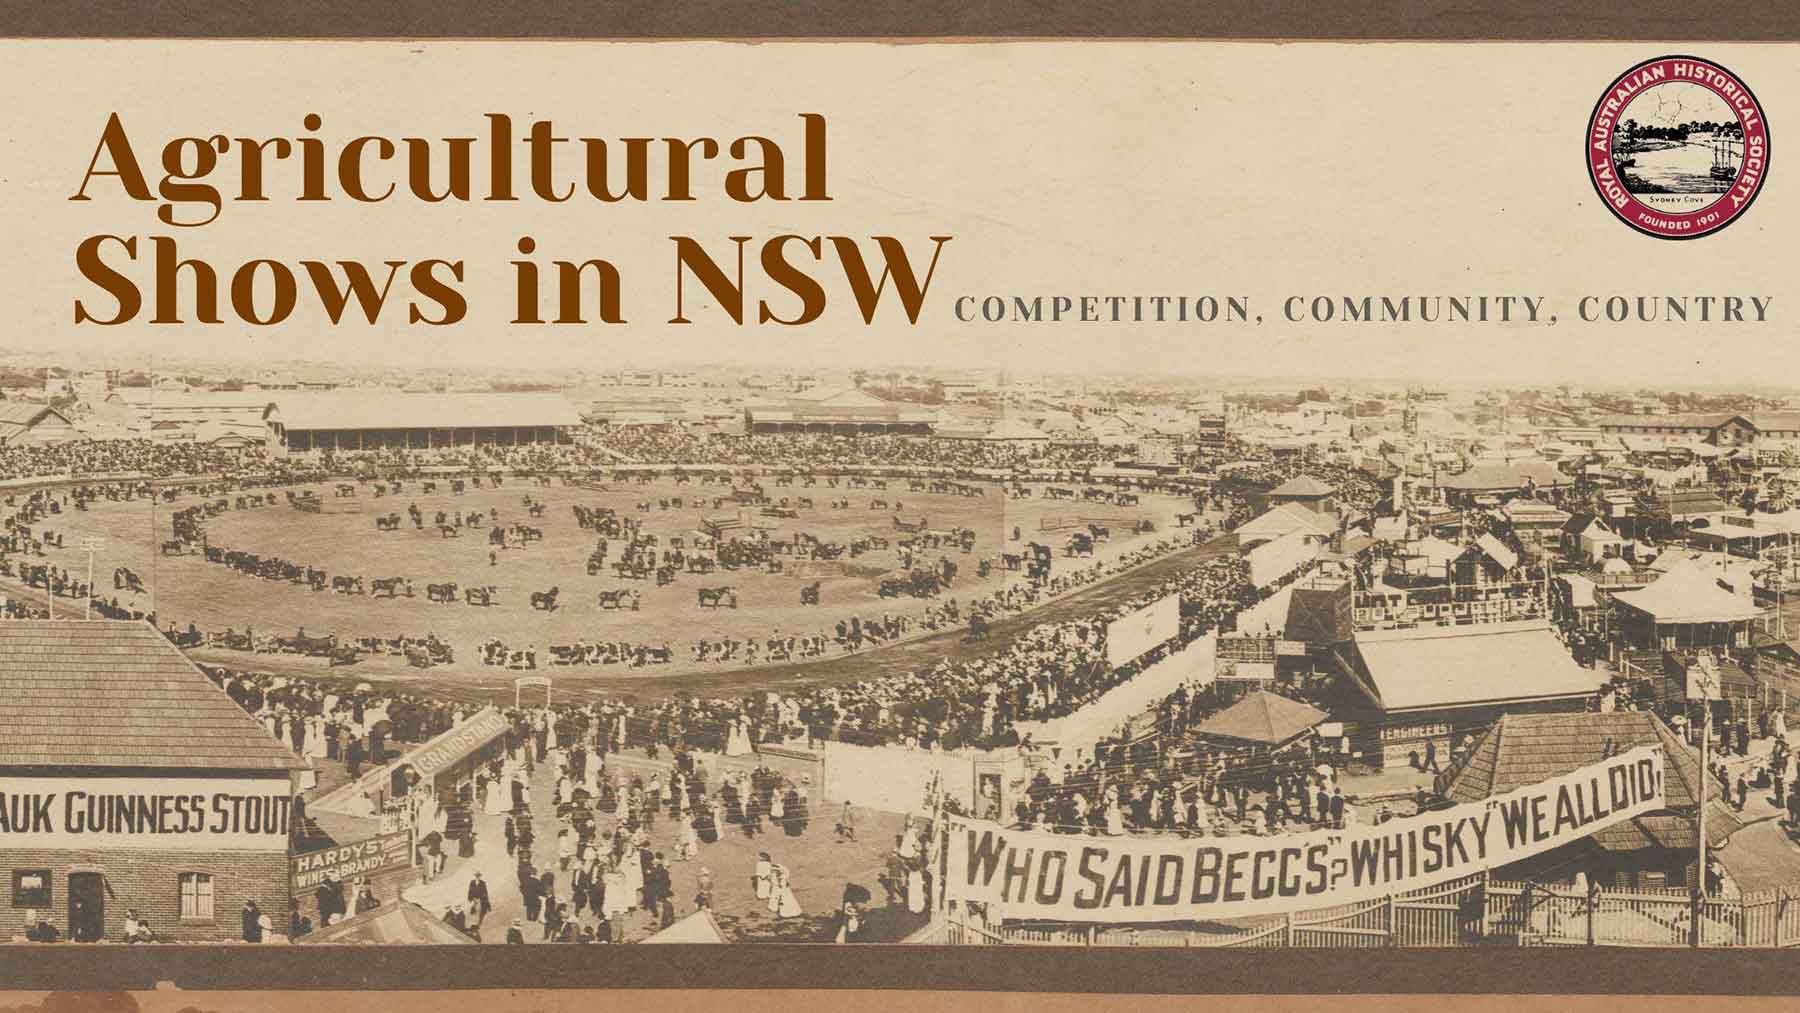 A sepia photograph of a historical agricultural show in New South Wales Australia